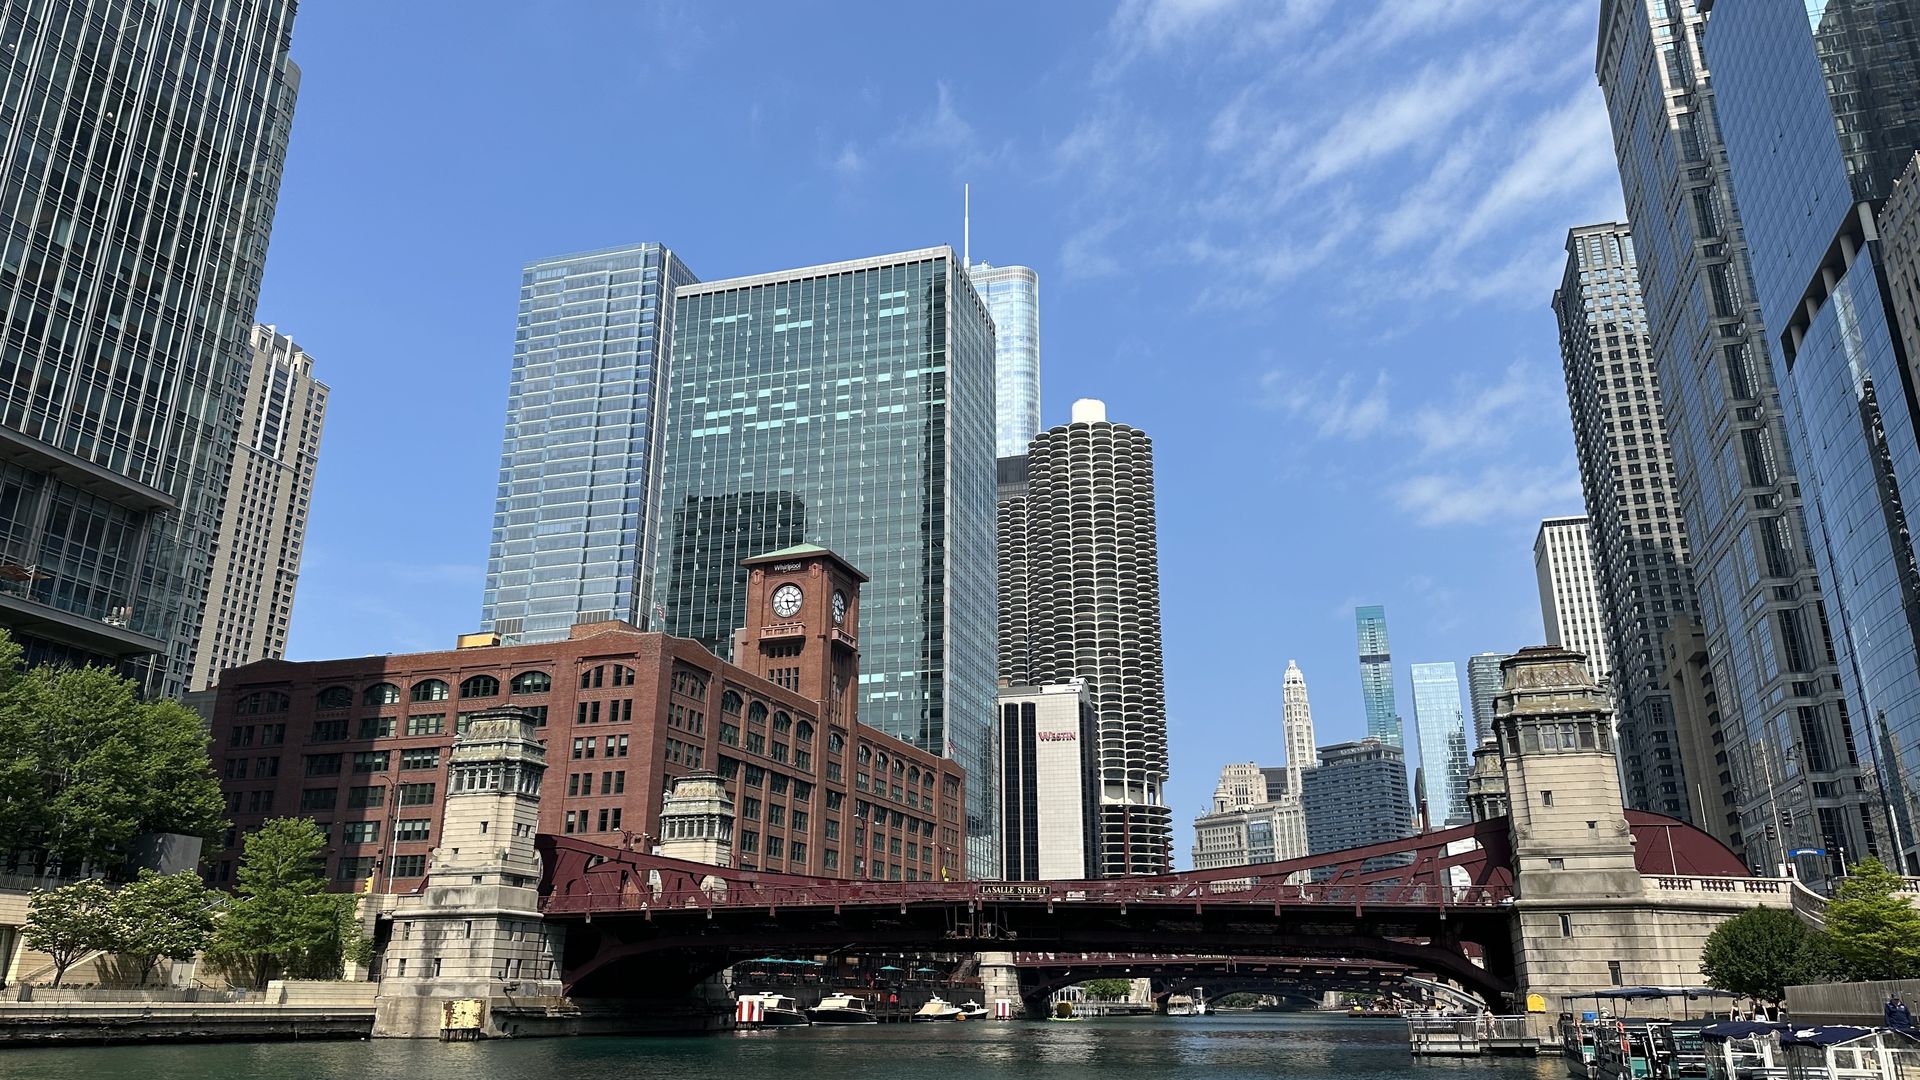 A photo of the riverwalk in Chicago